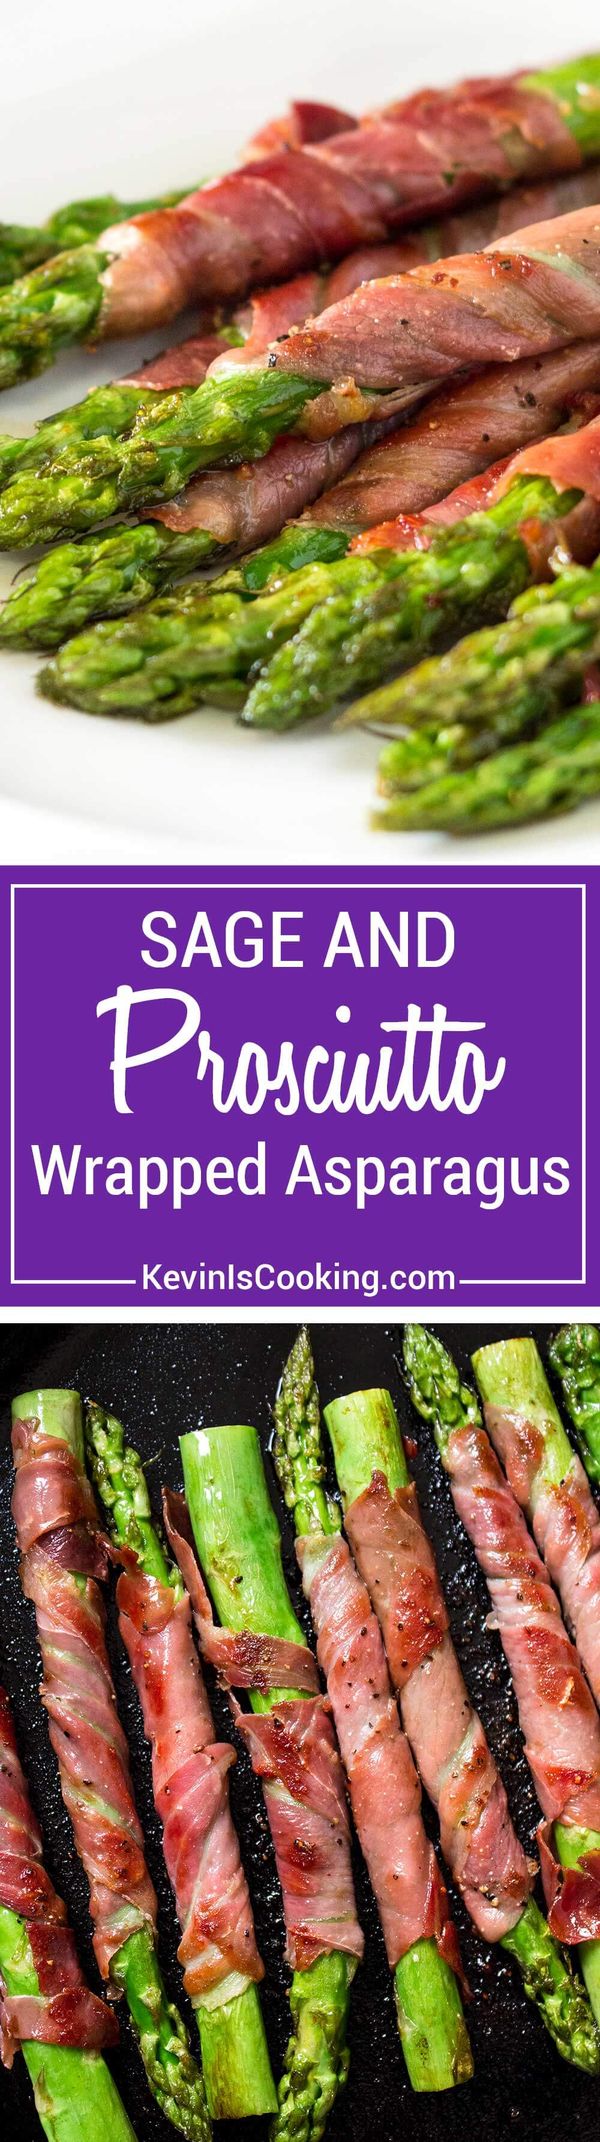 Wrapped Asparagus with Prosciutto and Sage